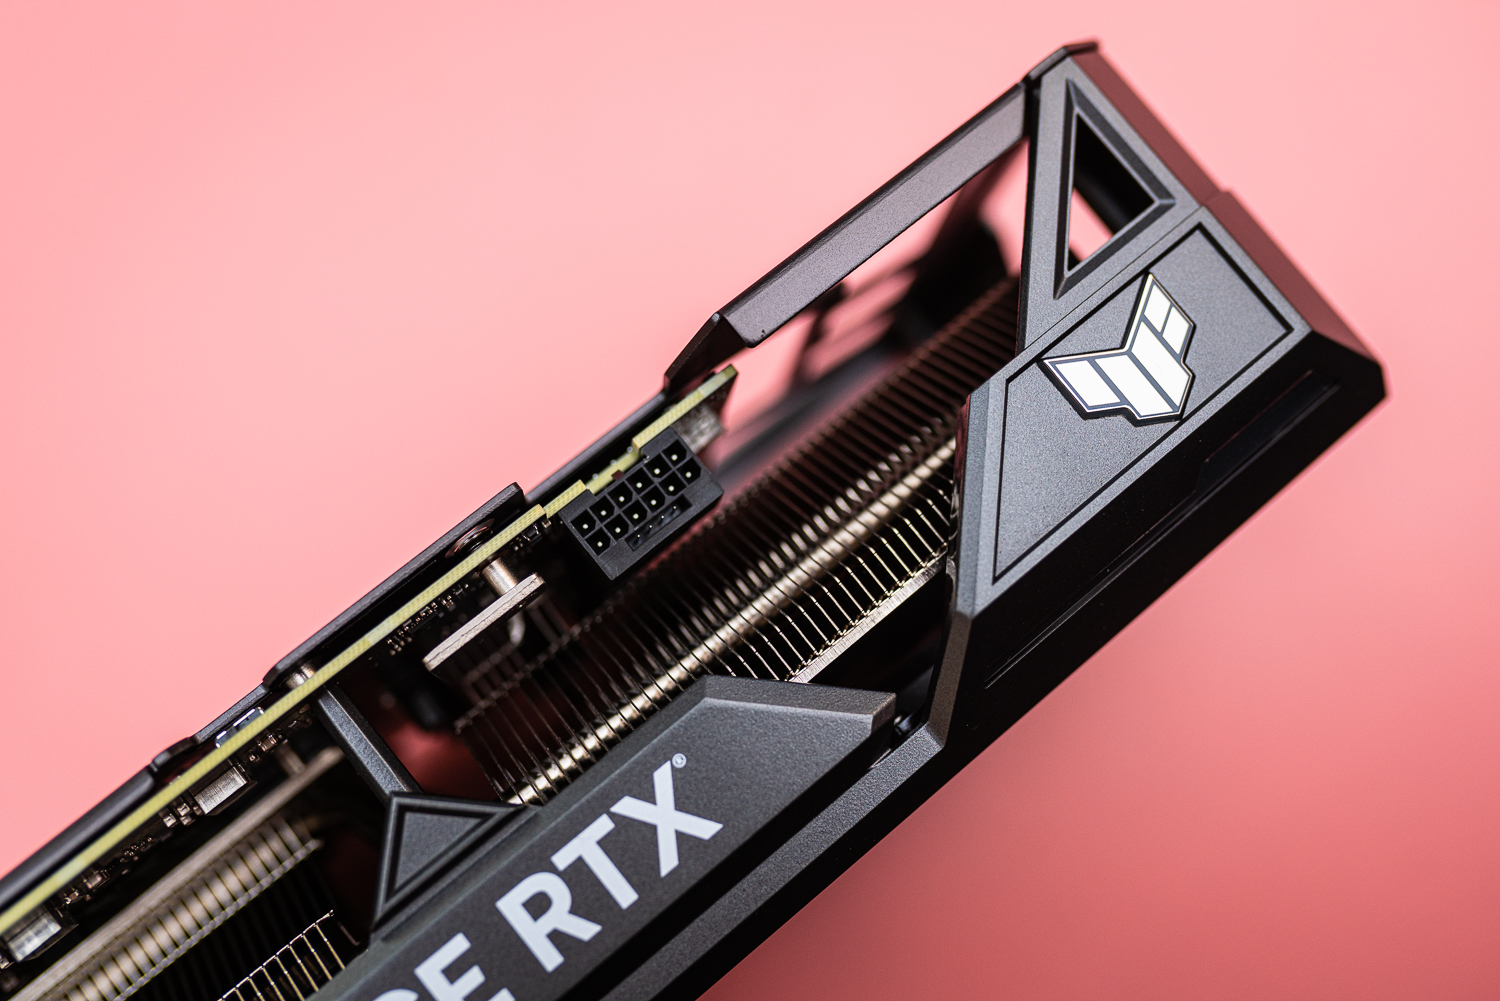 NVIDIA GeForce RTX 4080 is 19% faster than RTX 3090 Ti in the first gaming  review 